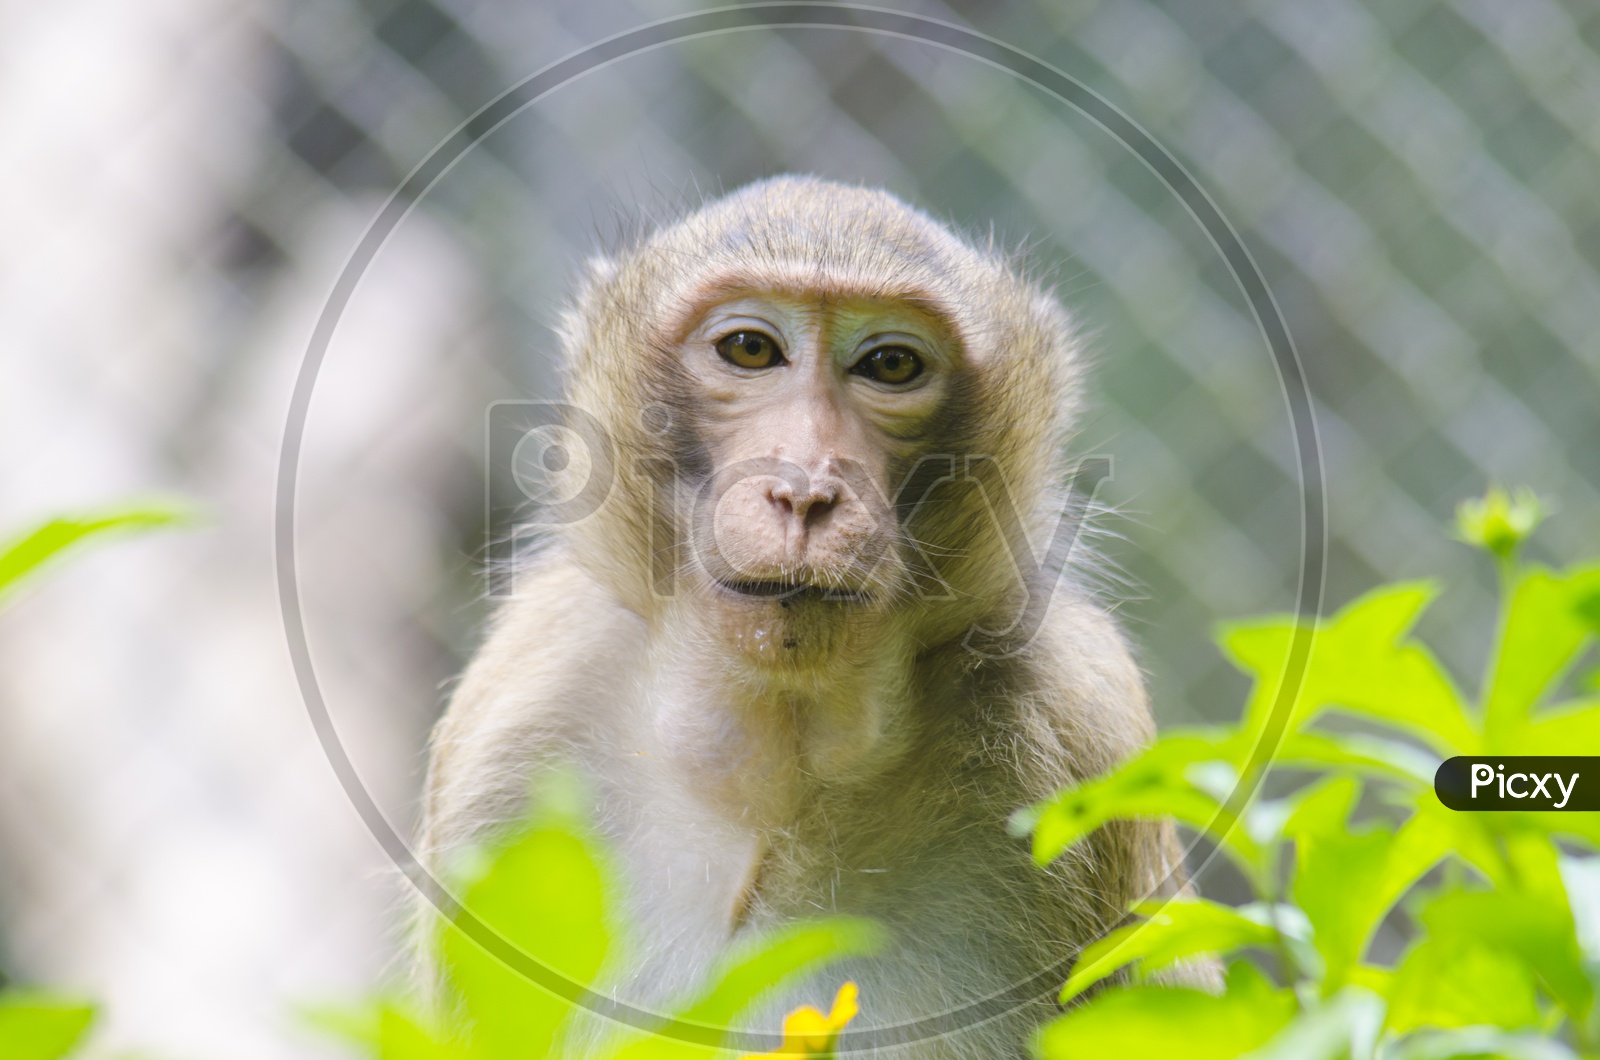 A long tailed macaque in Thailand